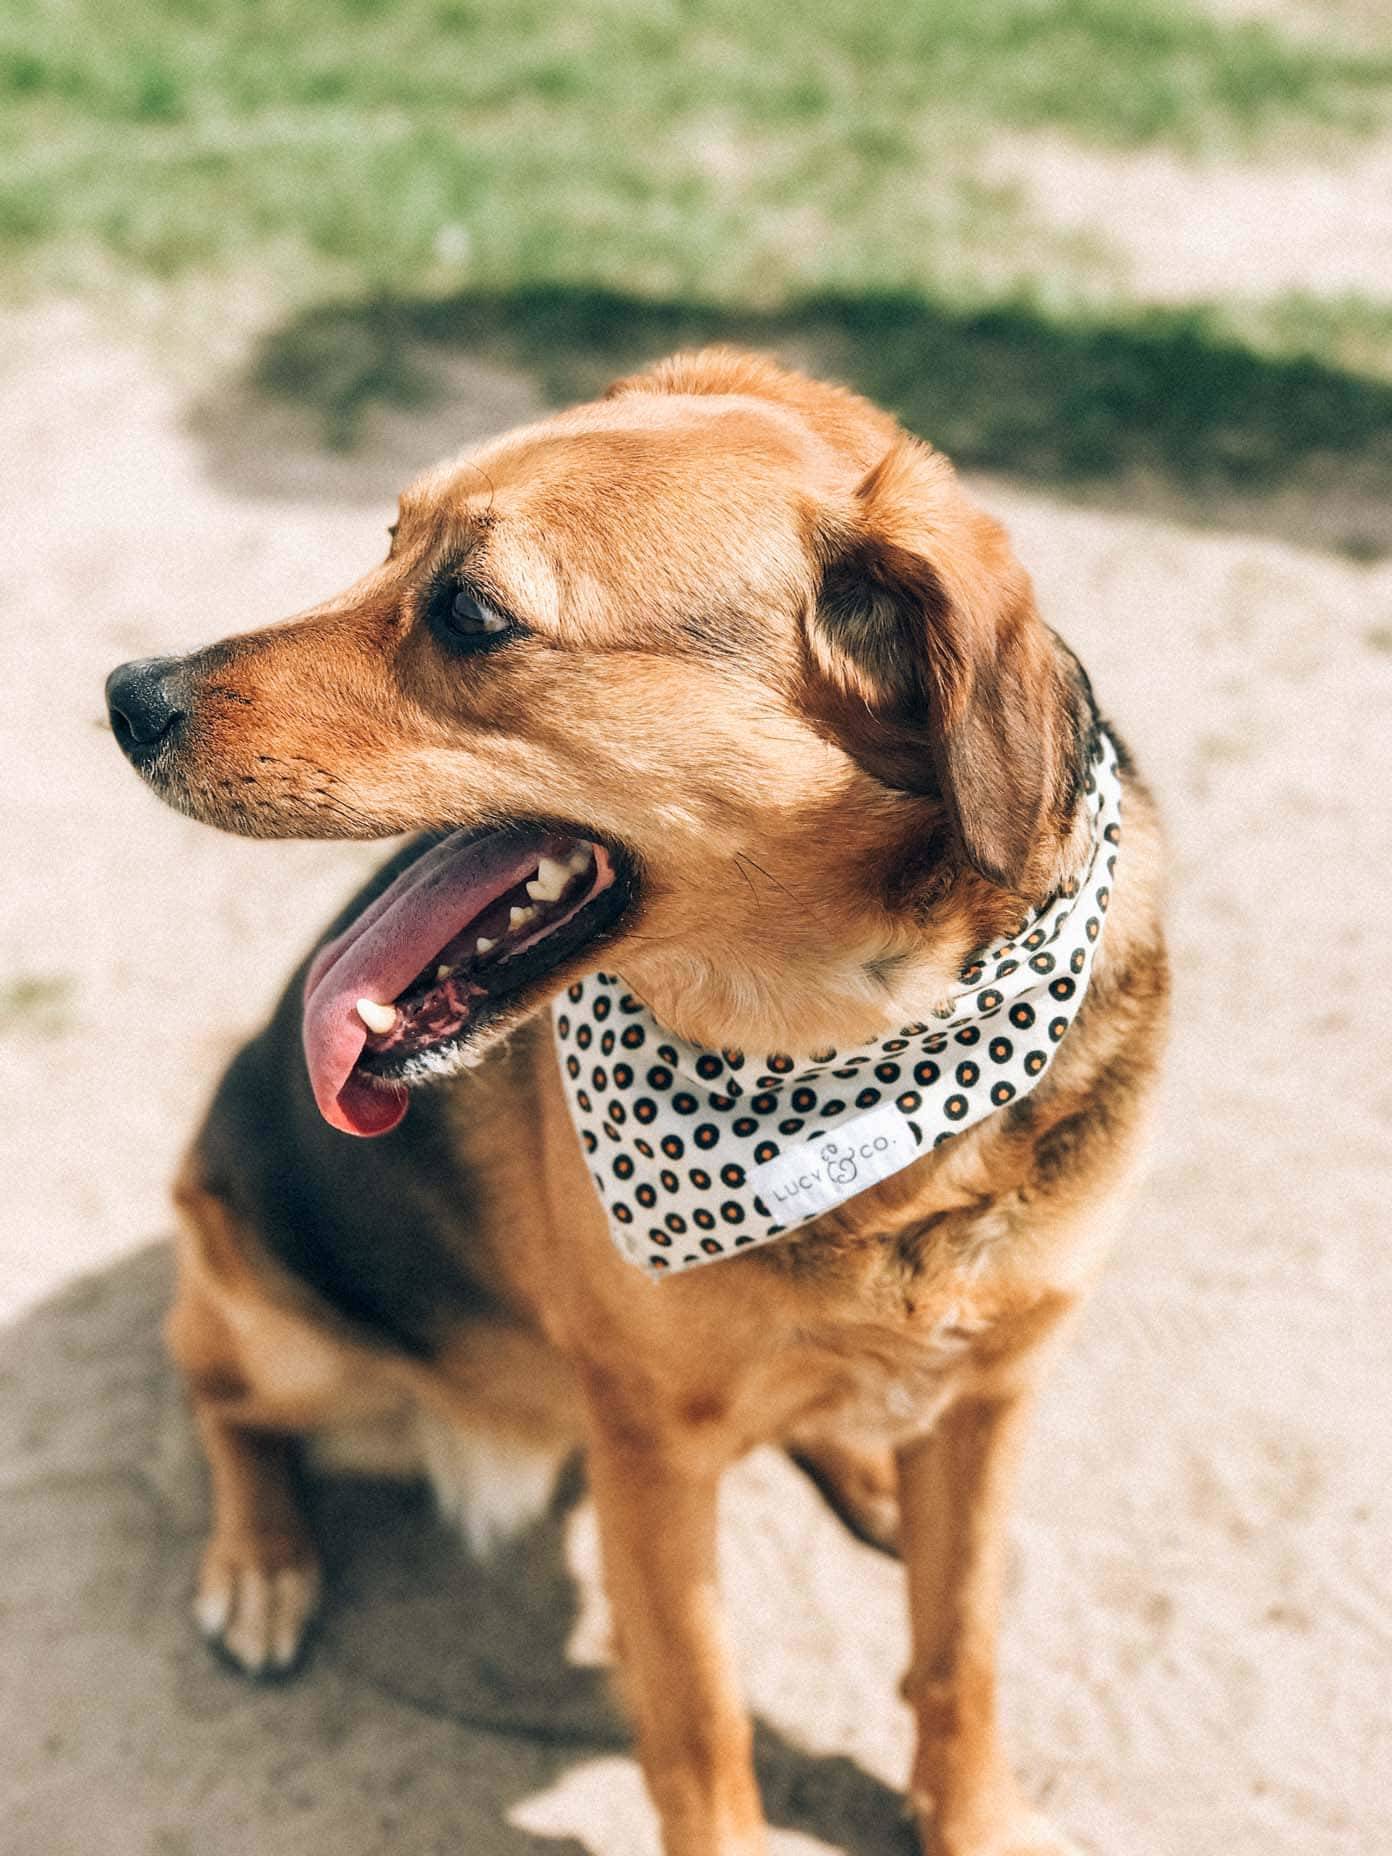 A small brown and black dog wearing a white bandana with black polka dots sits in the dirt.